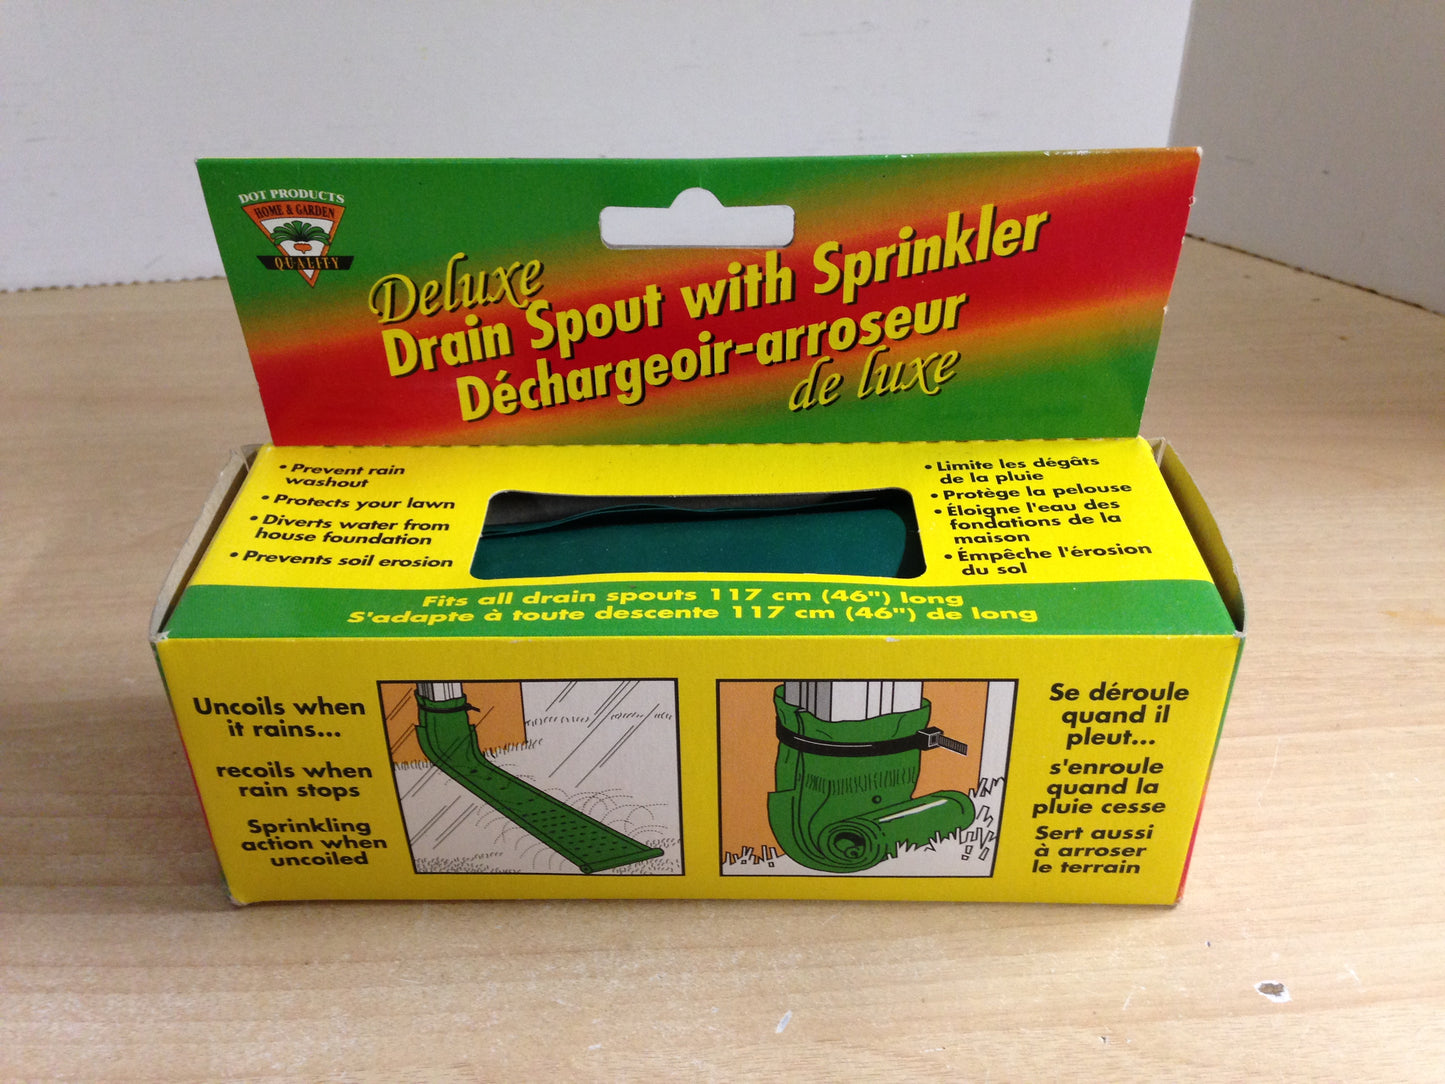 Delux Drain Spout With Sprinkler Diverts Water From House and Foundation NEW in box